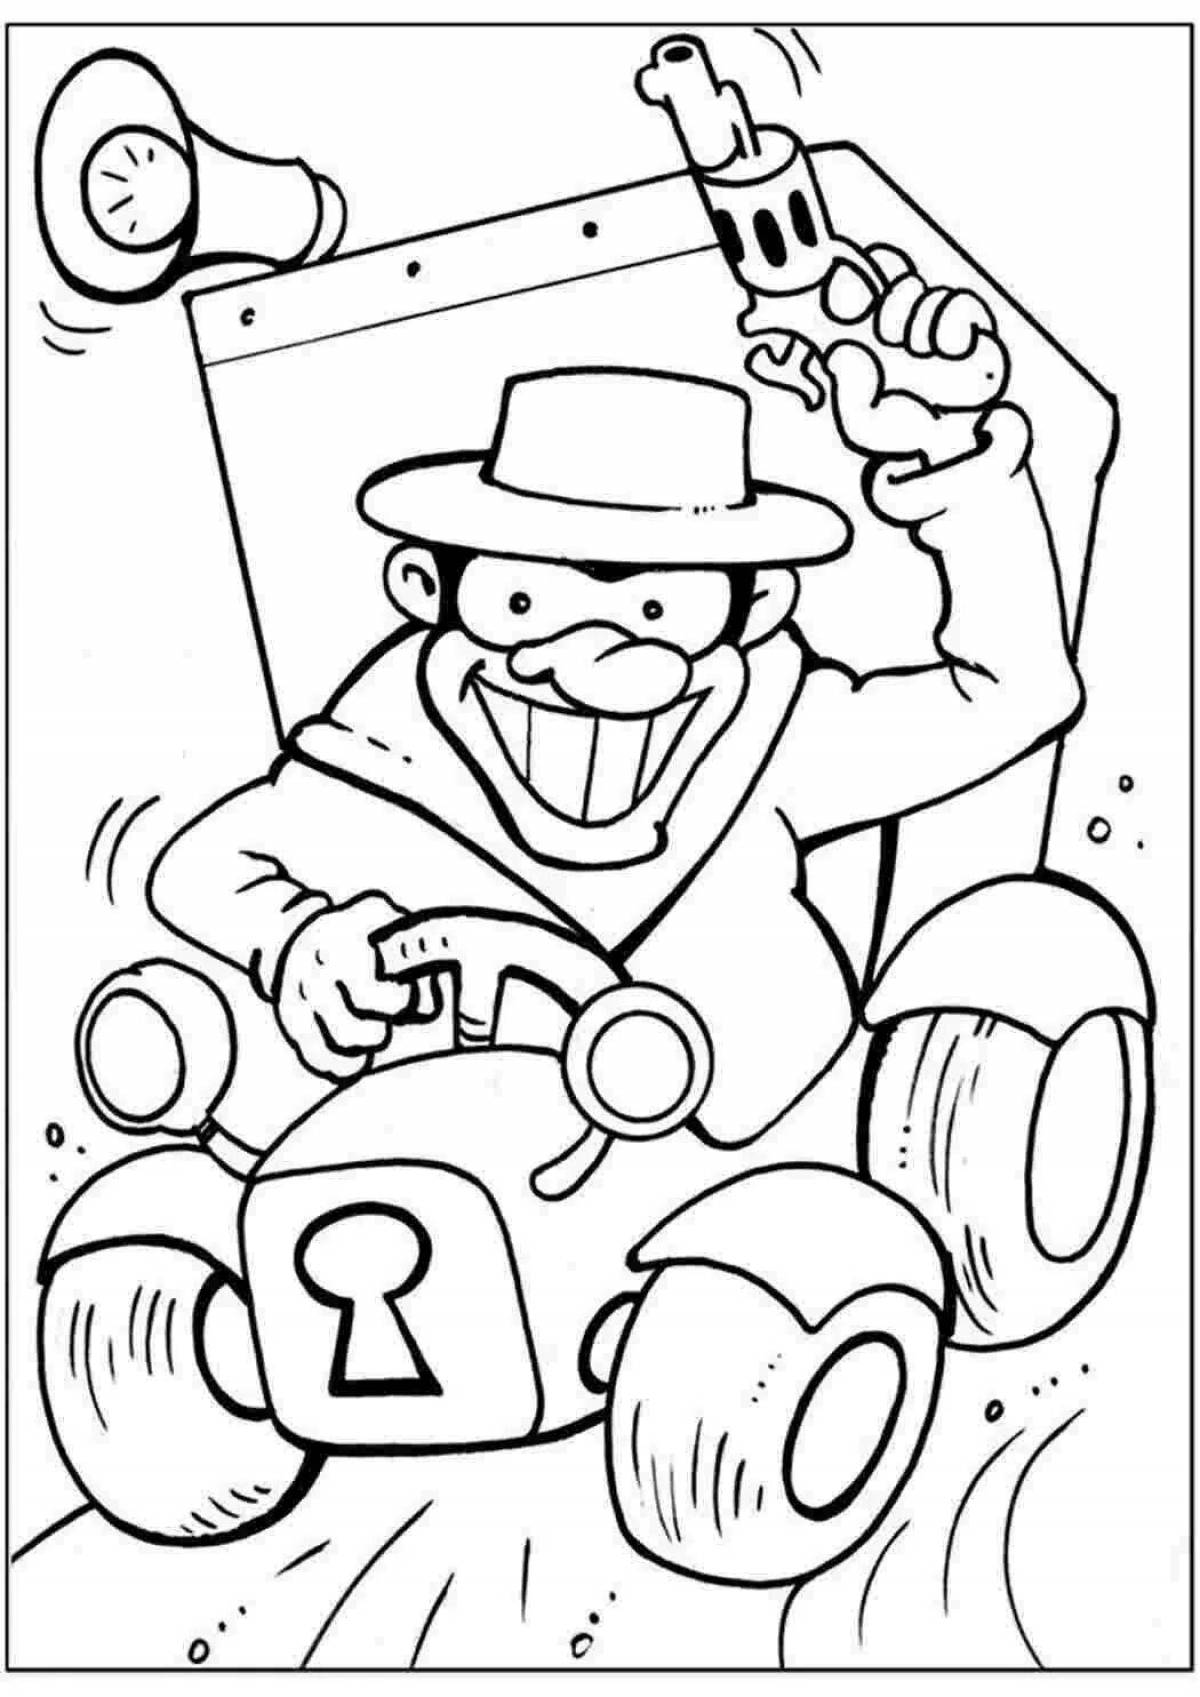 Detective inspirational coloring book